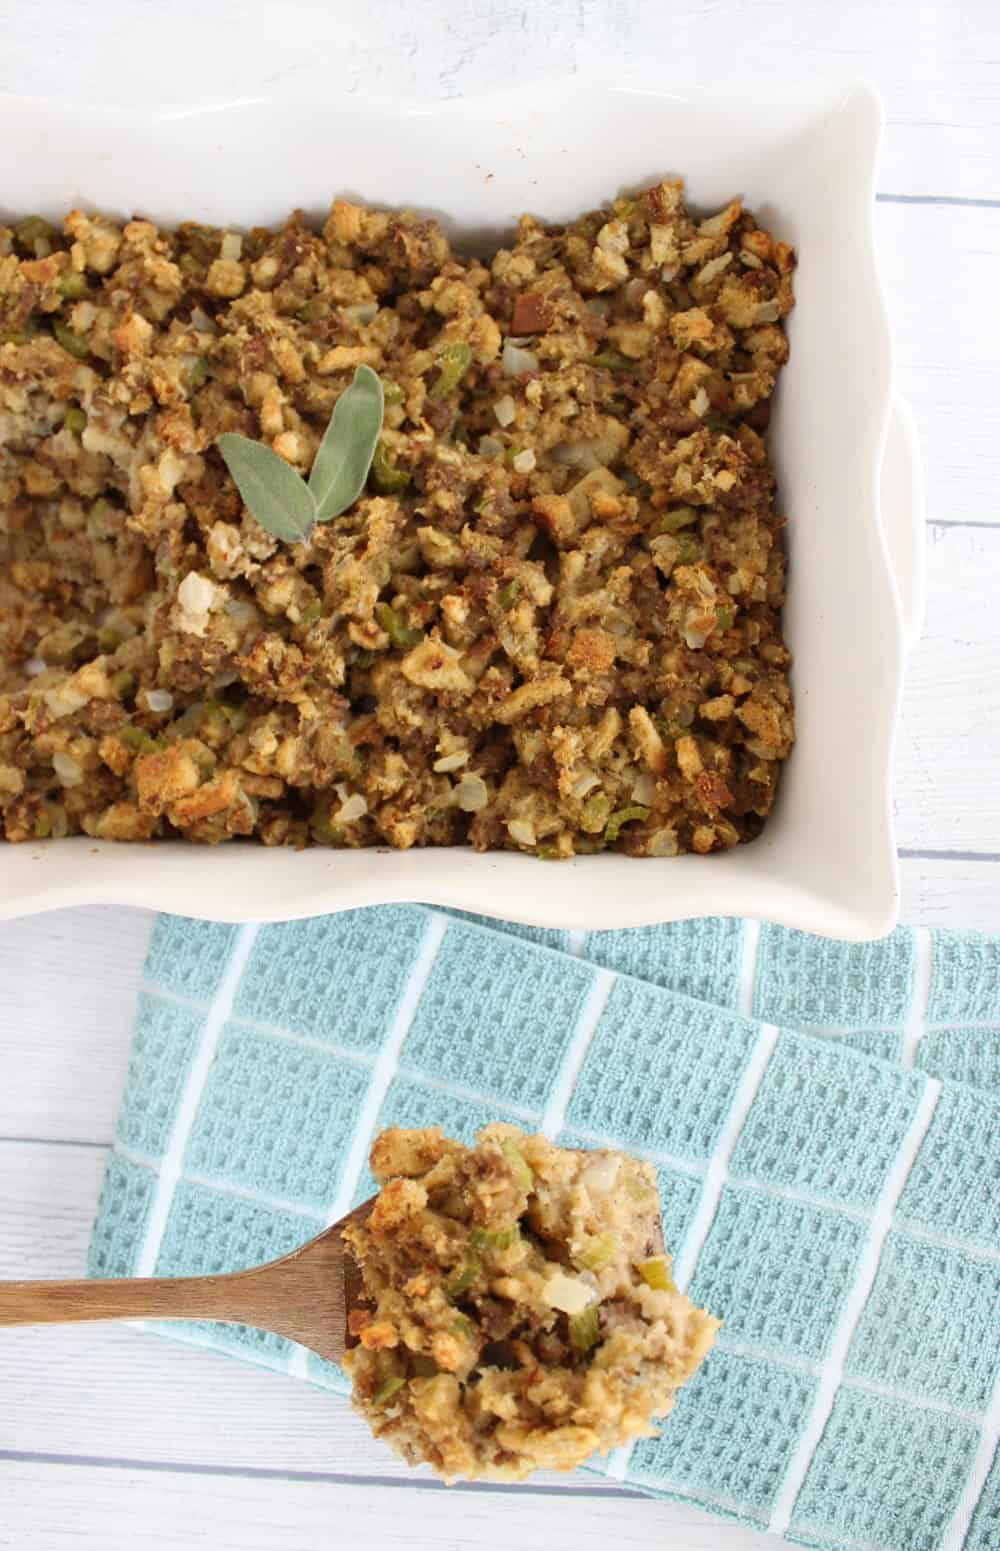 Thanksgiving Make Ahead Stuffing with sausage and herbs in a white casserole dish, a wooden spoon full of stuffing on the counter next to it.